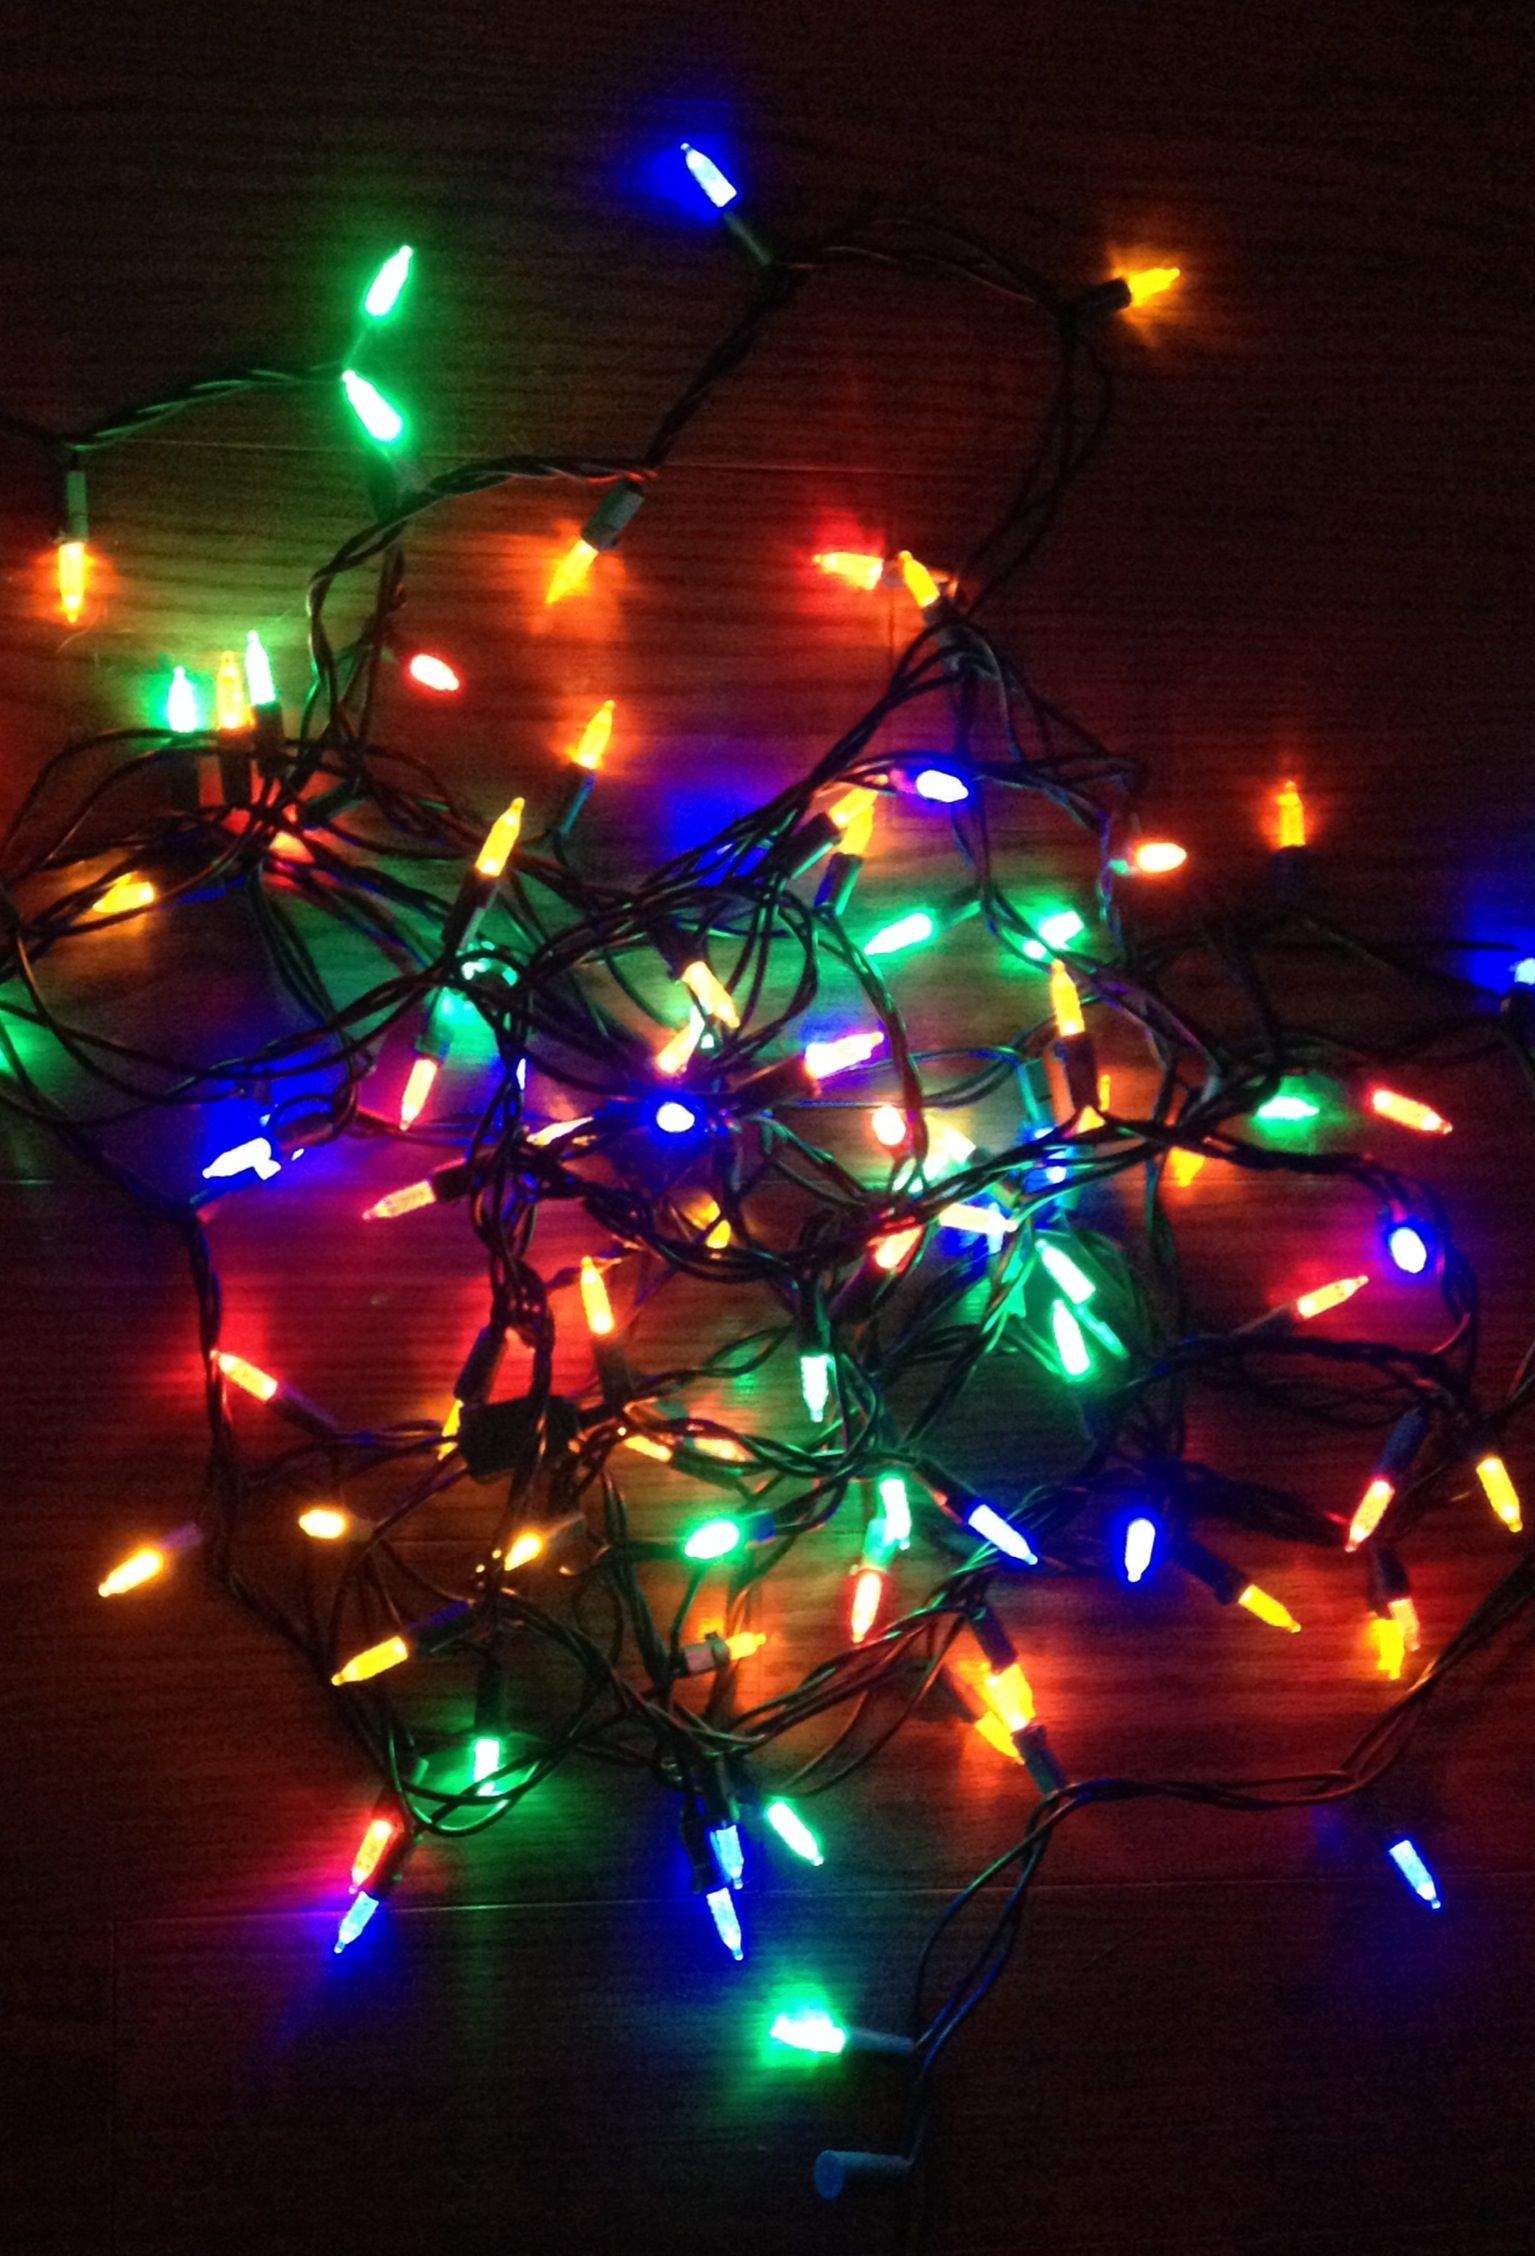 Packing up the Christmas lights. By KimStewart. Christmas, Christmas lights, Christmas wallpaper